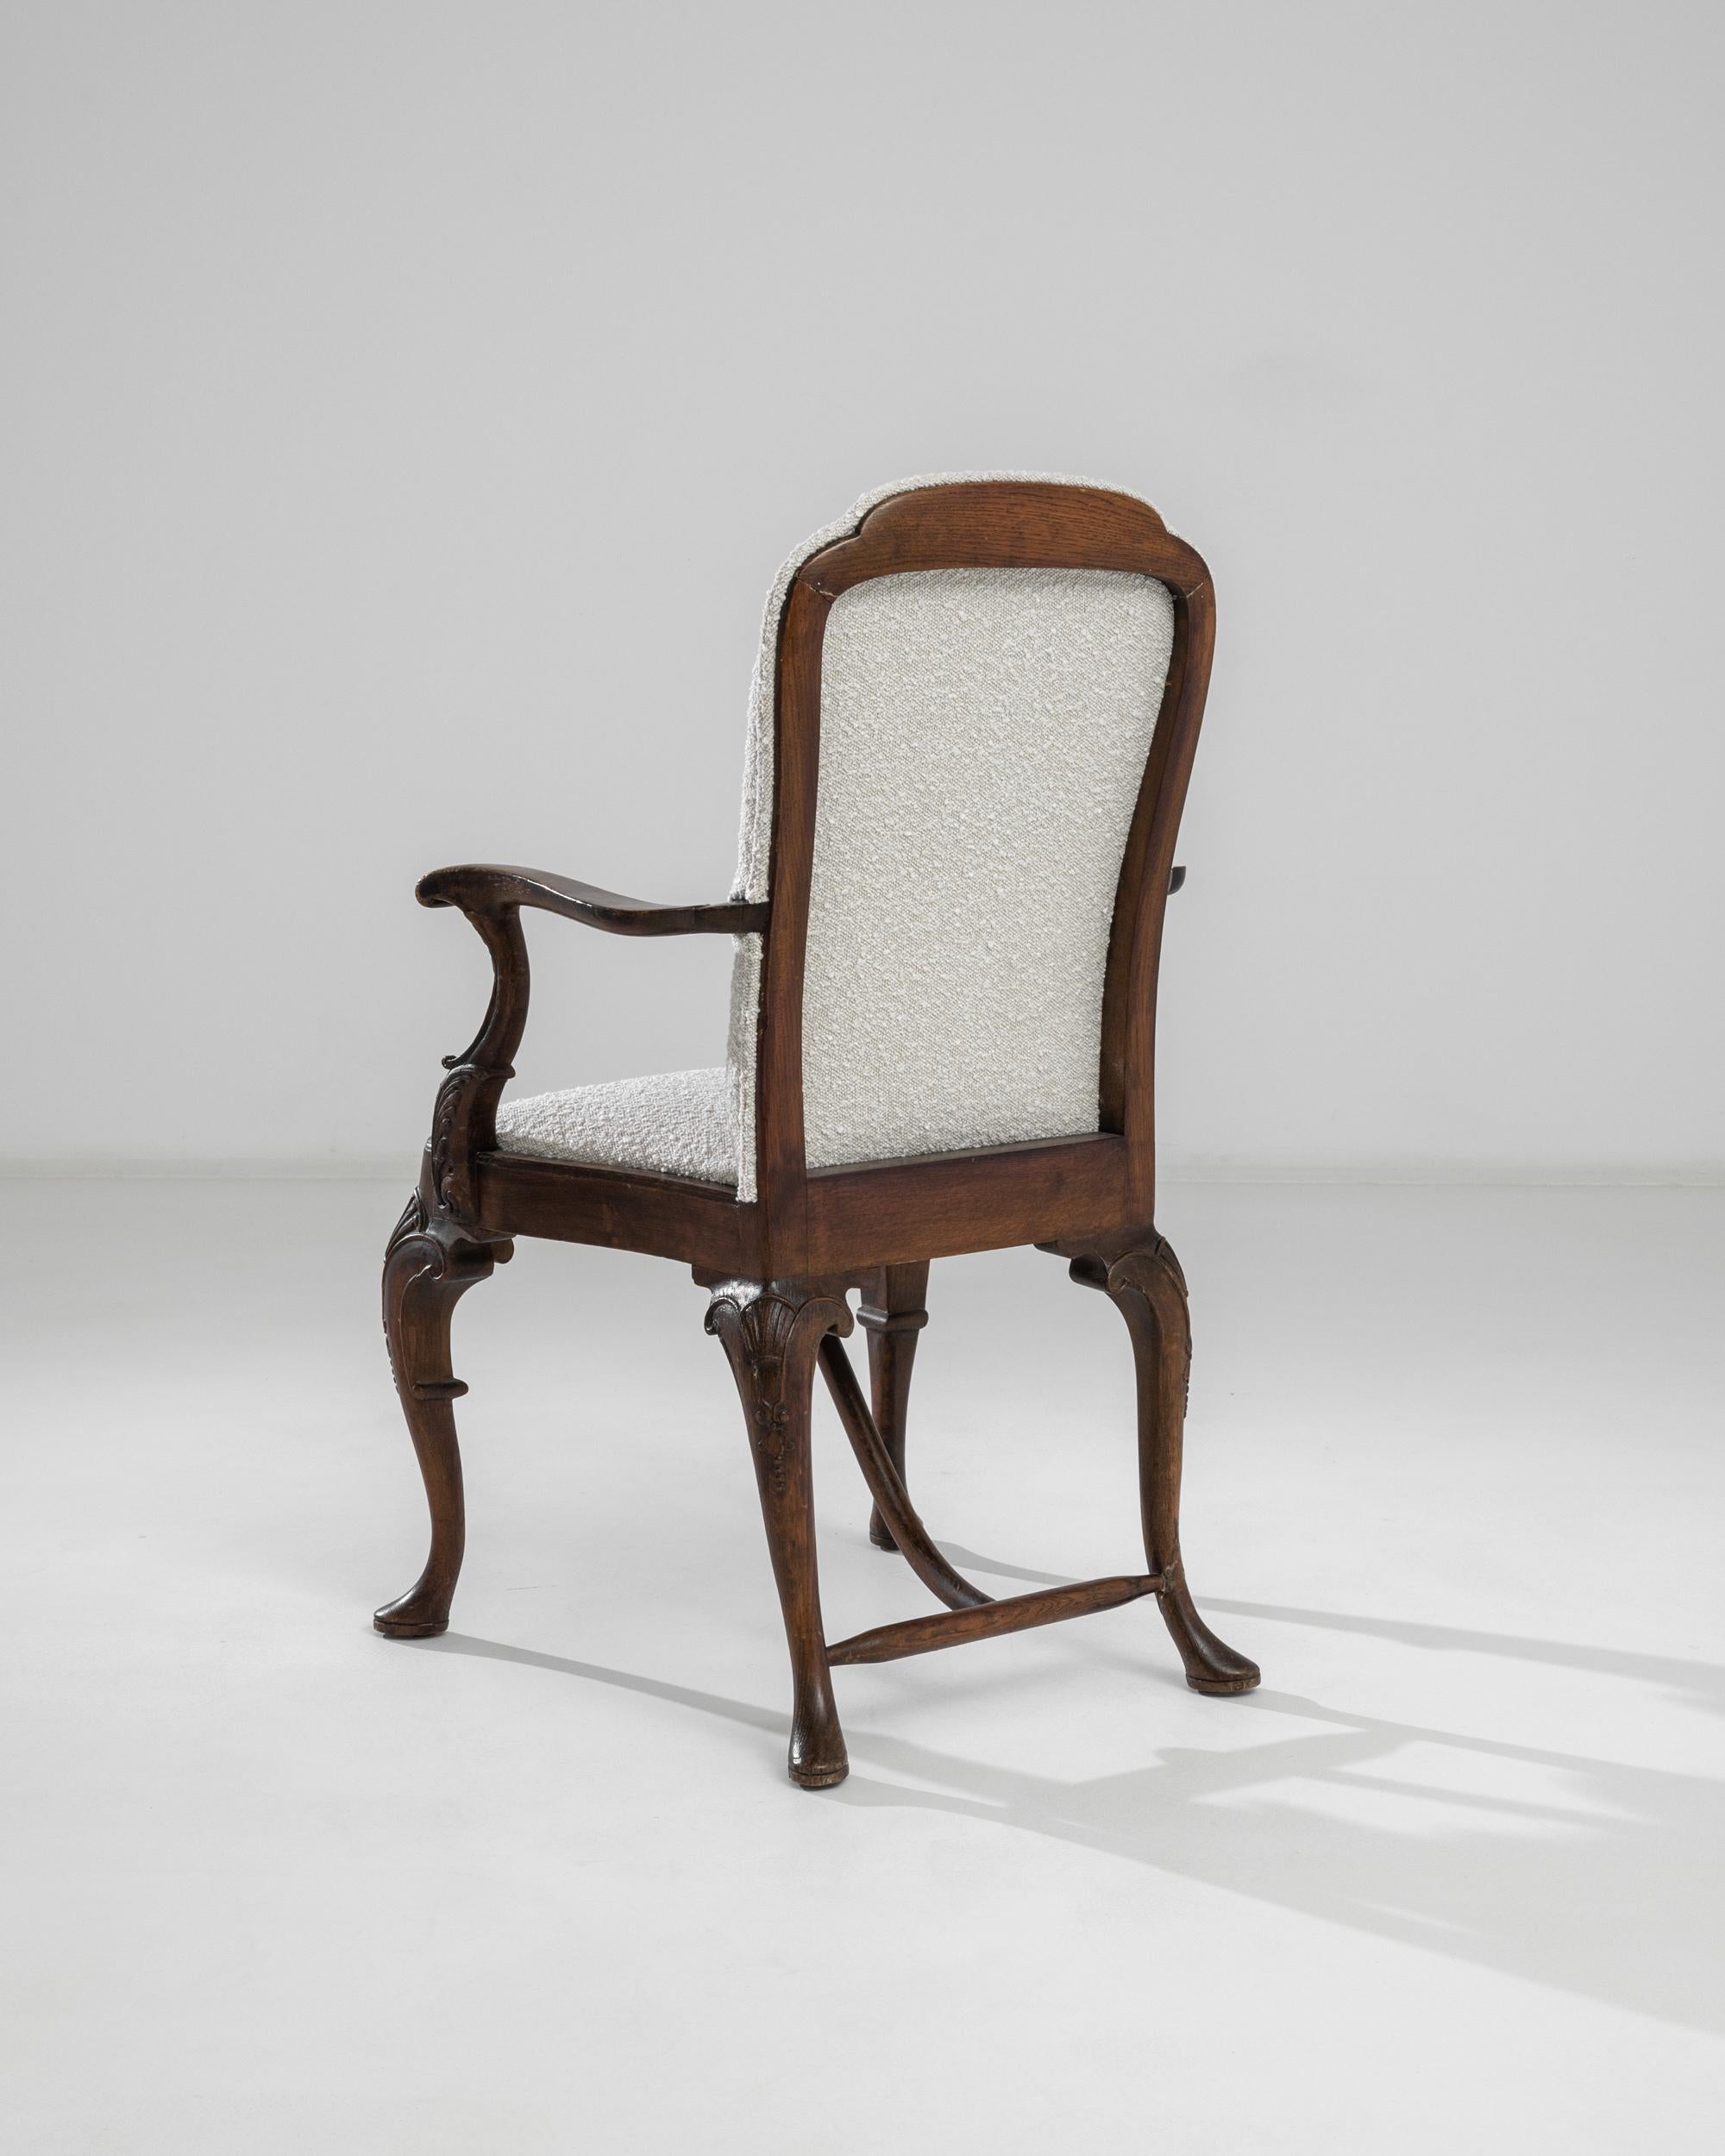 Early 20th Century 1900s British Wooden Armchair